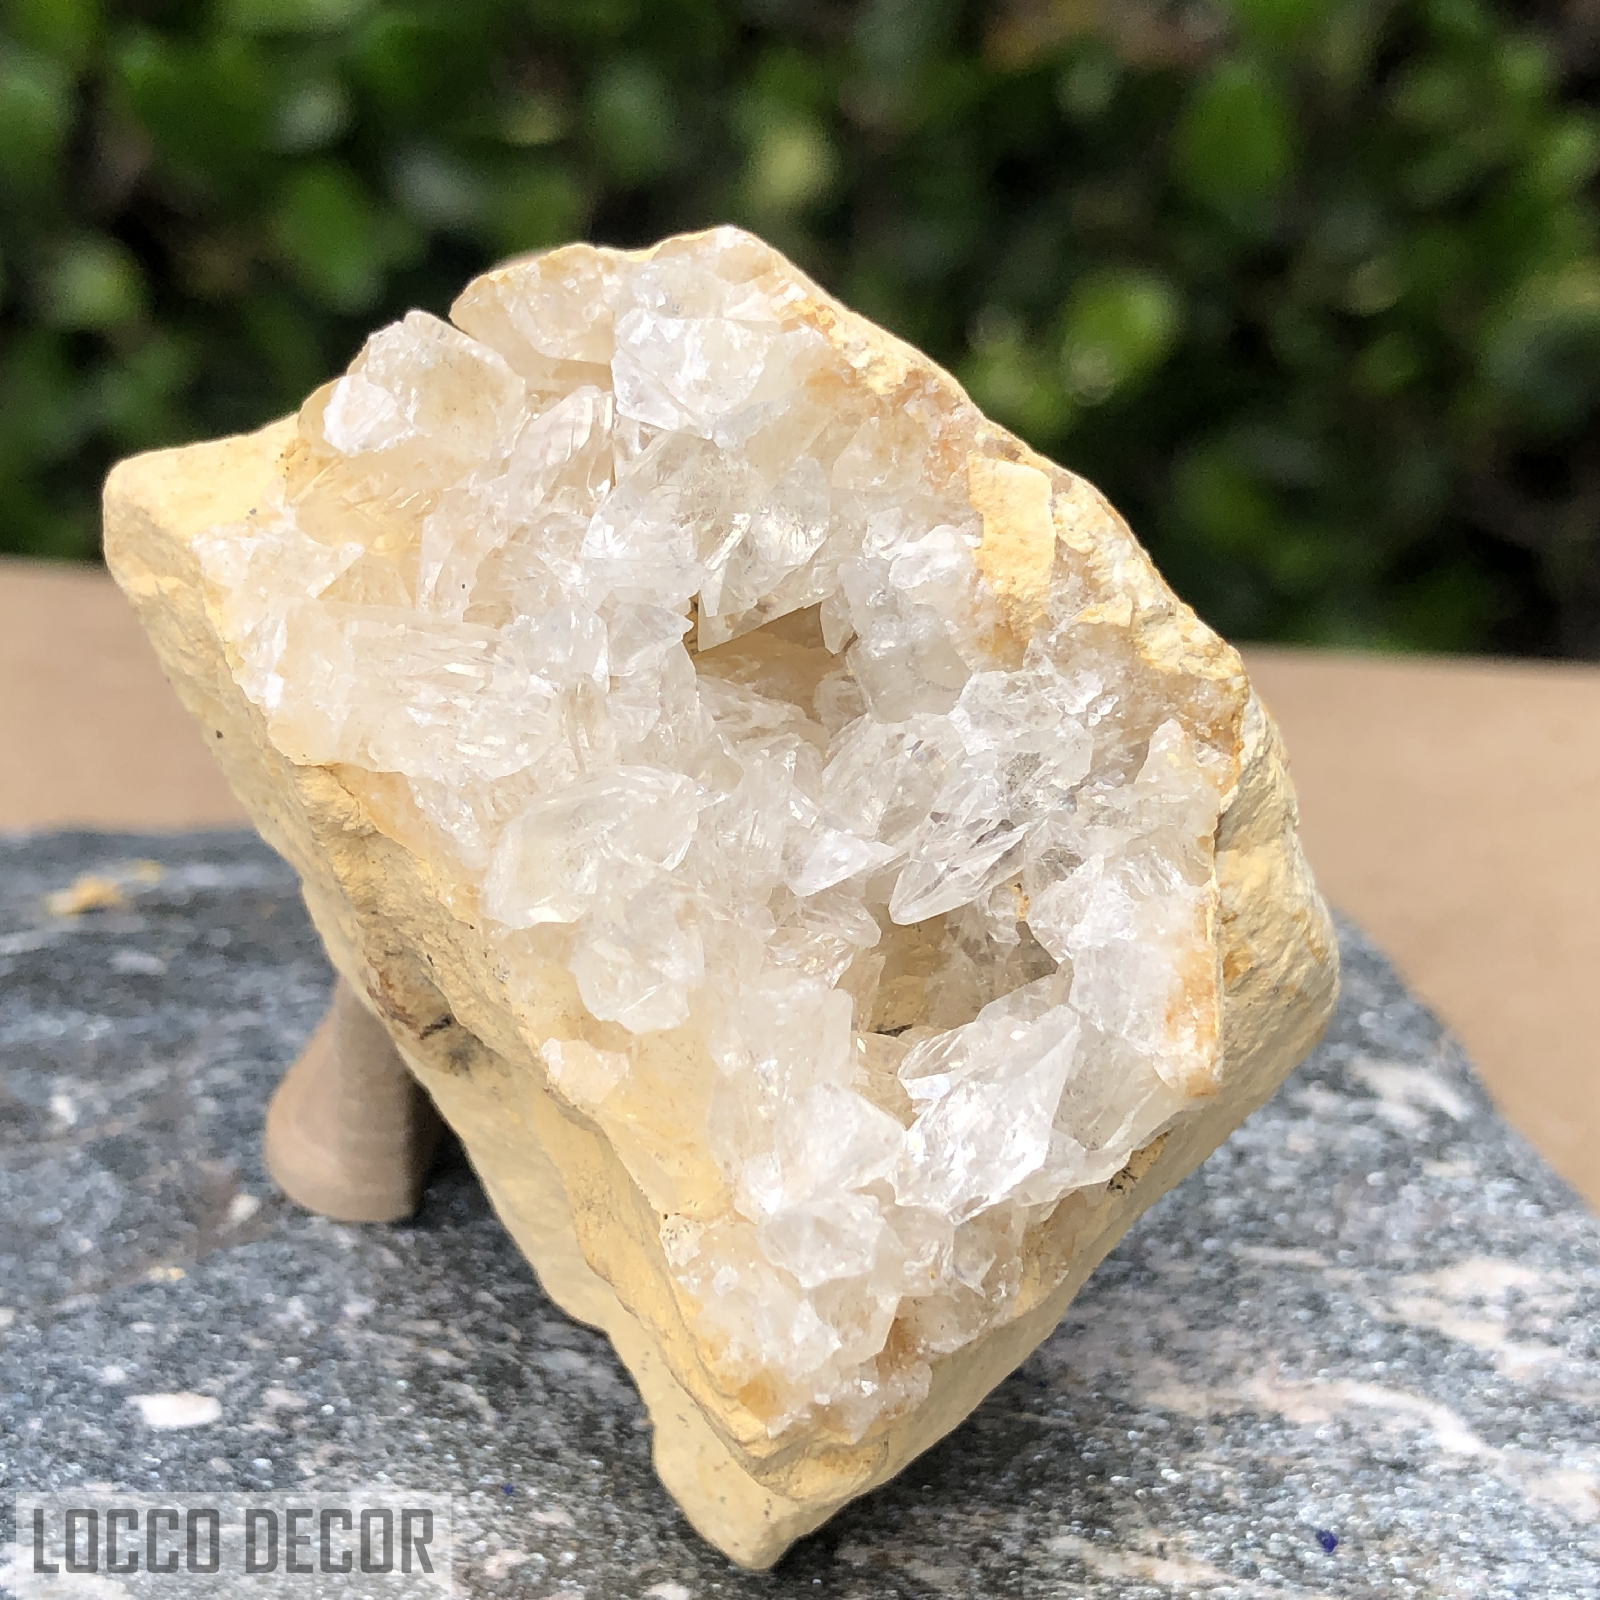 86g 5x7x6cm Clear Clear Calcite Geode from Mexico